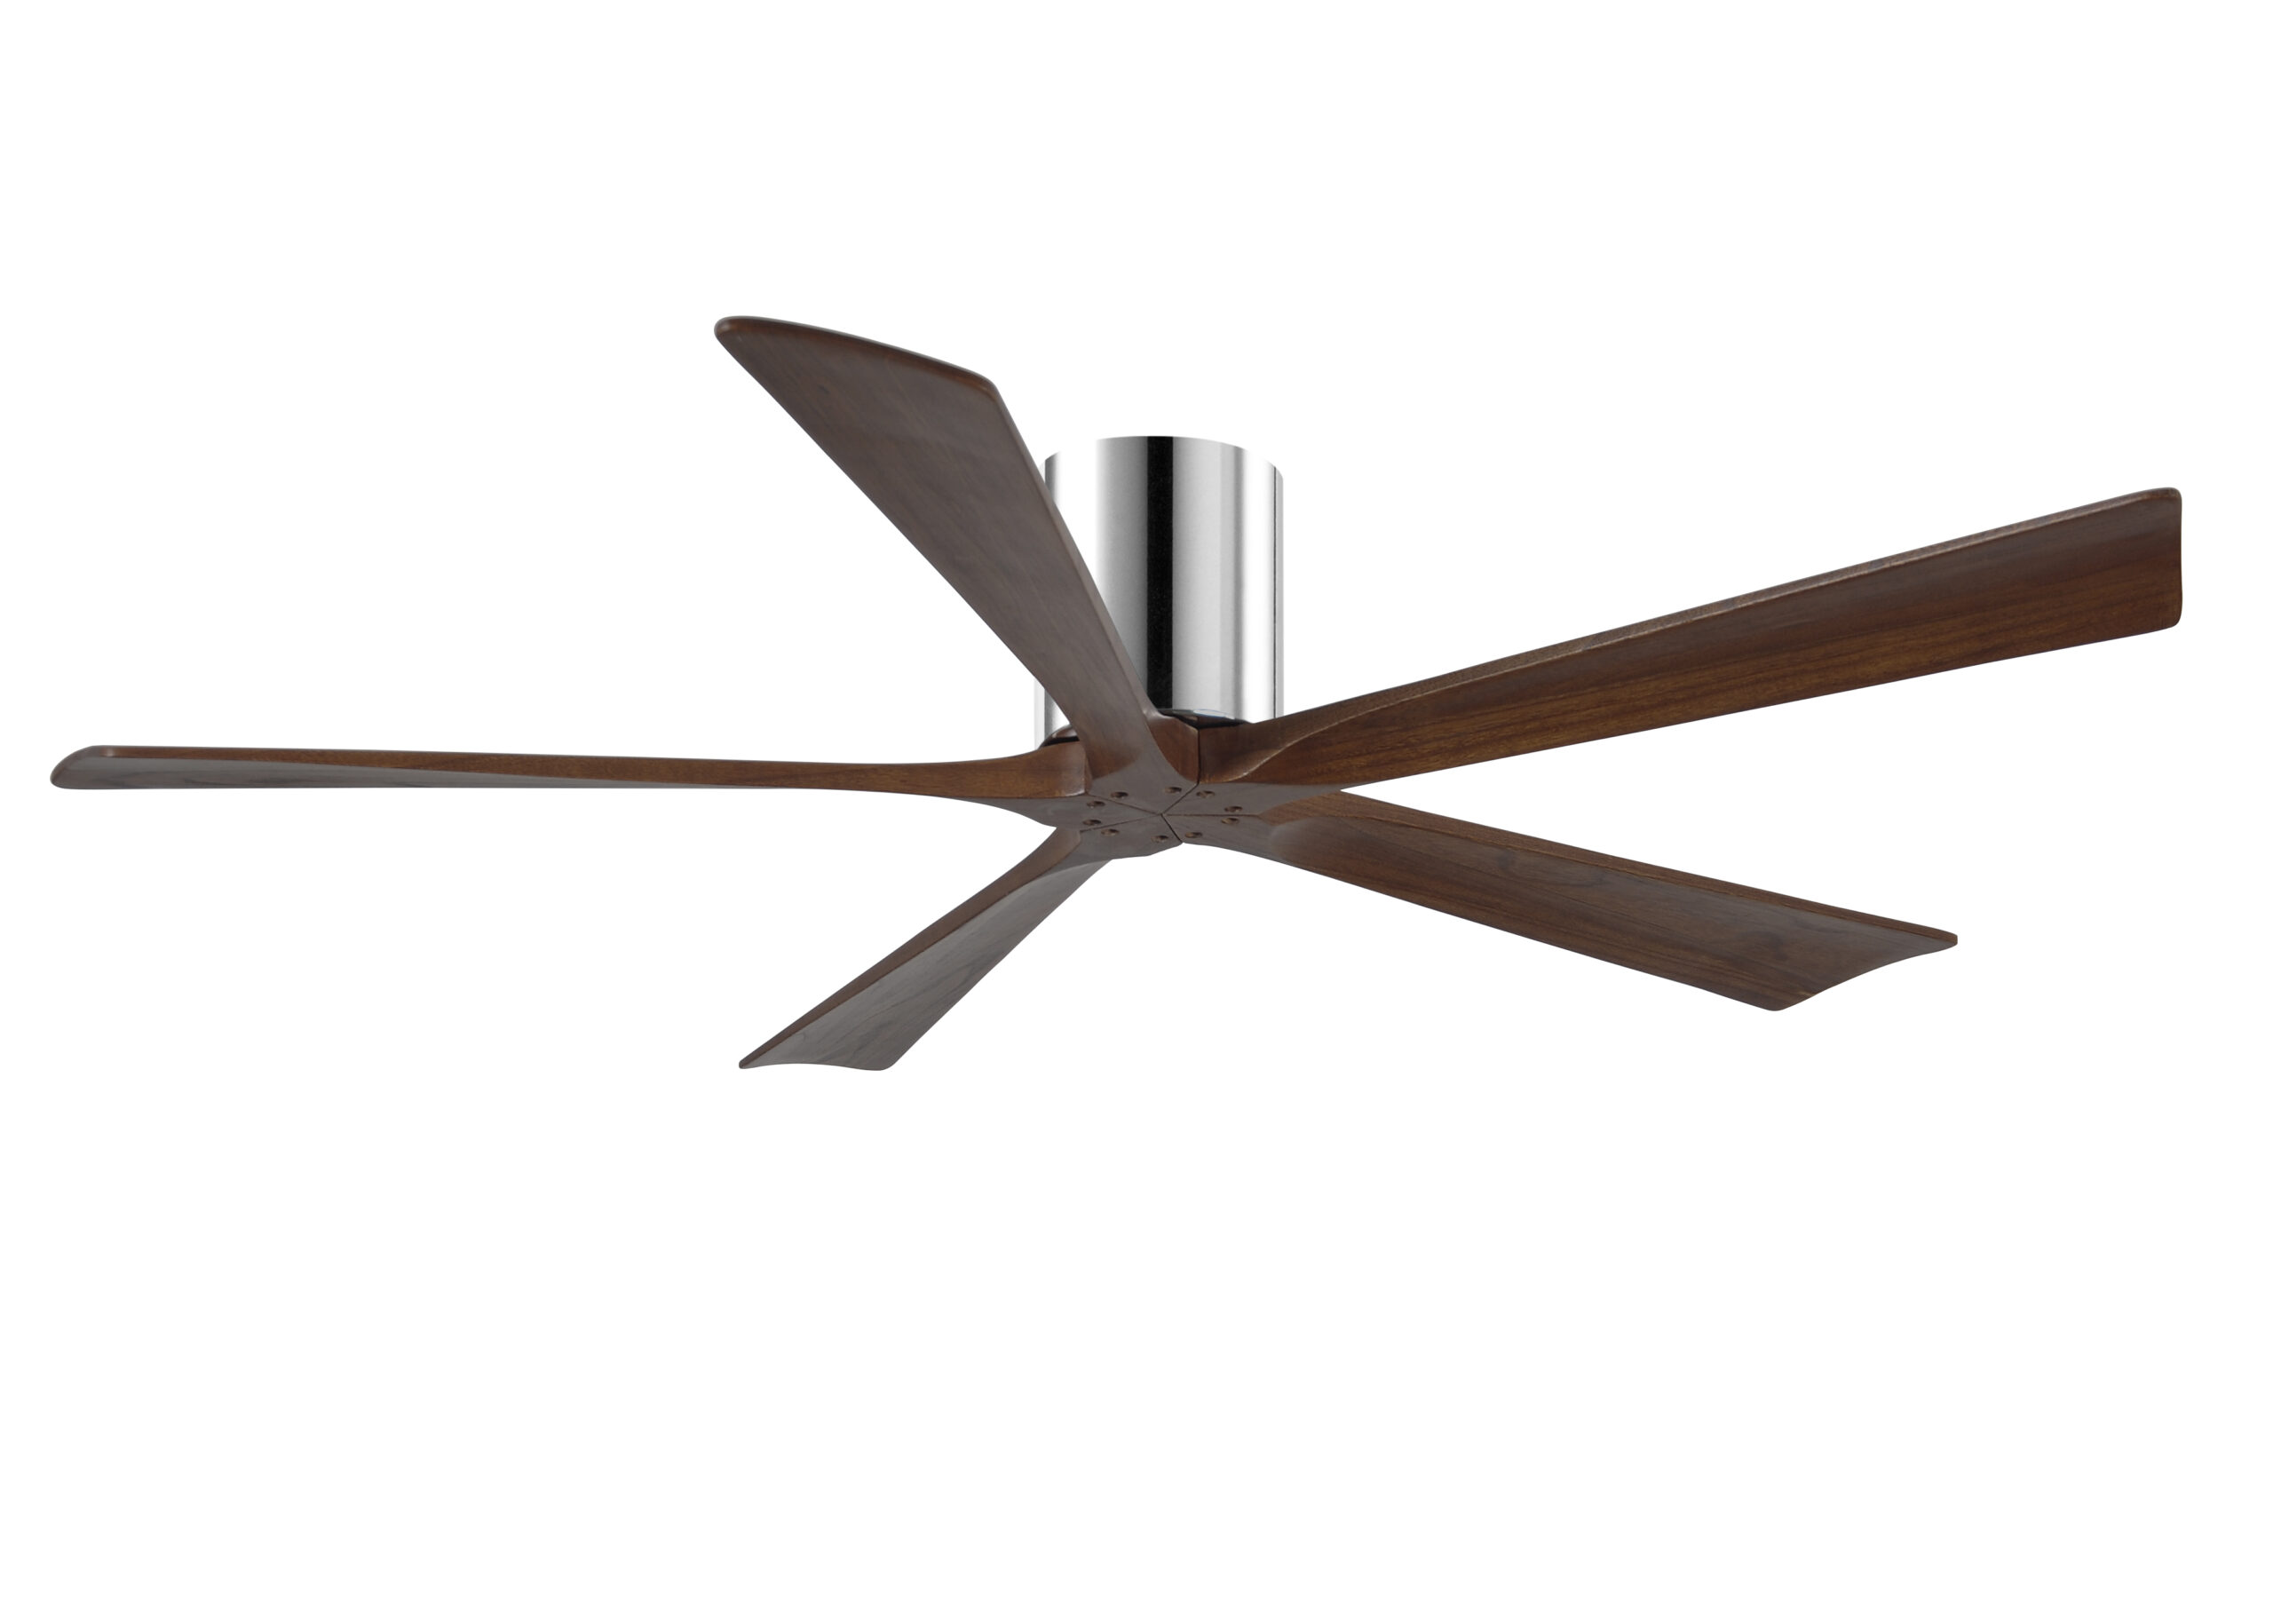 Irene-5H Ceiling Fan in Polished Chrome Finish with 60